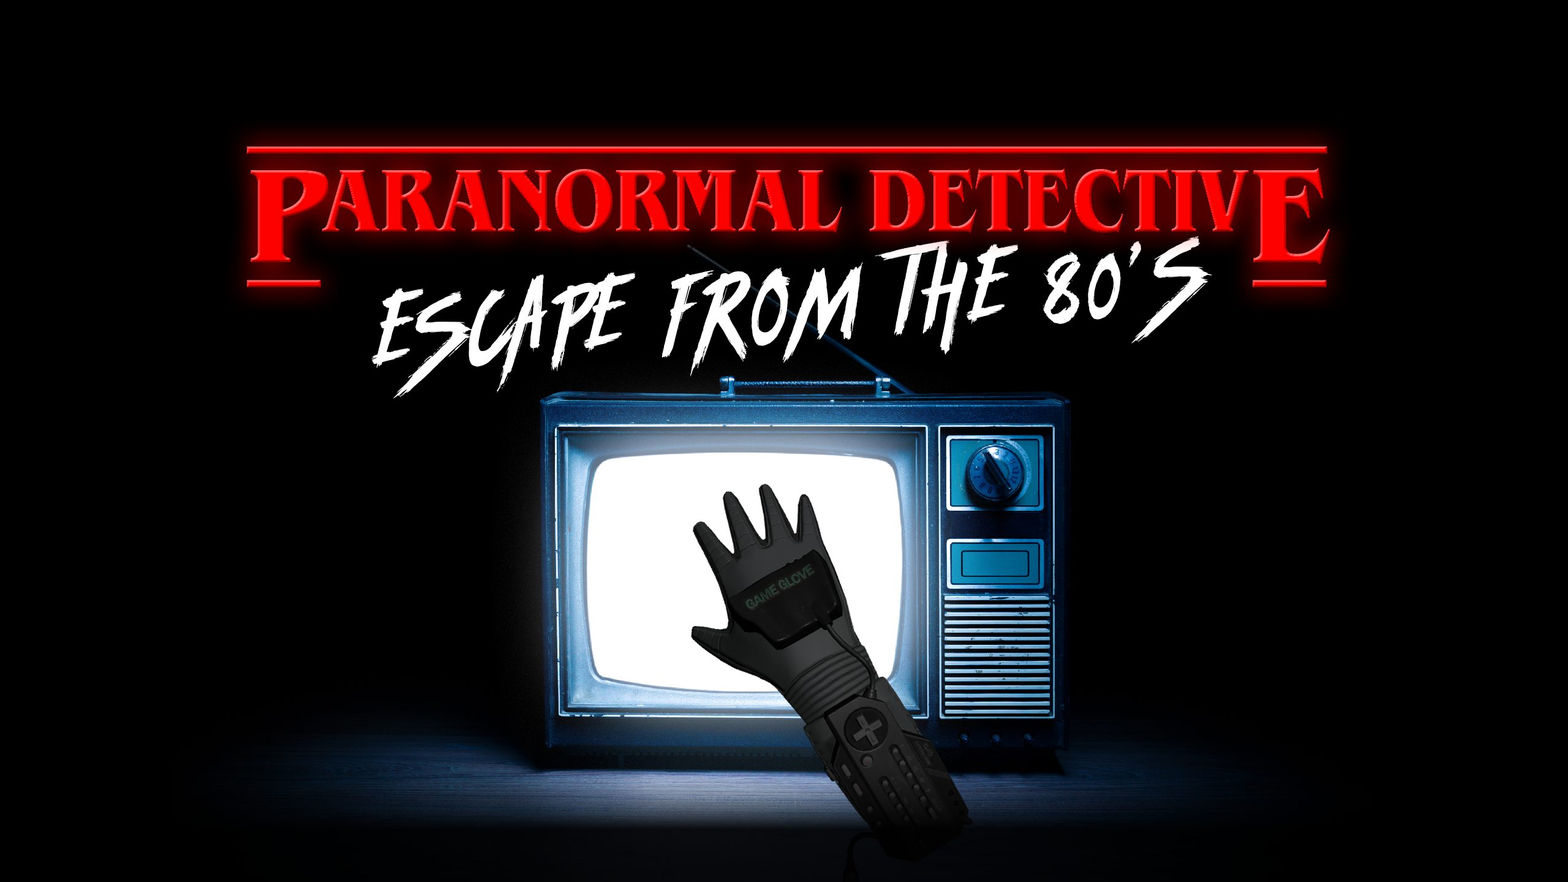 Paranormal Detective: Escape from the 80's